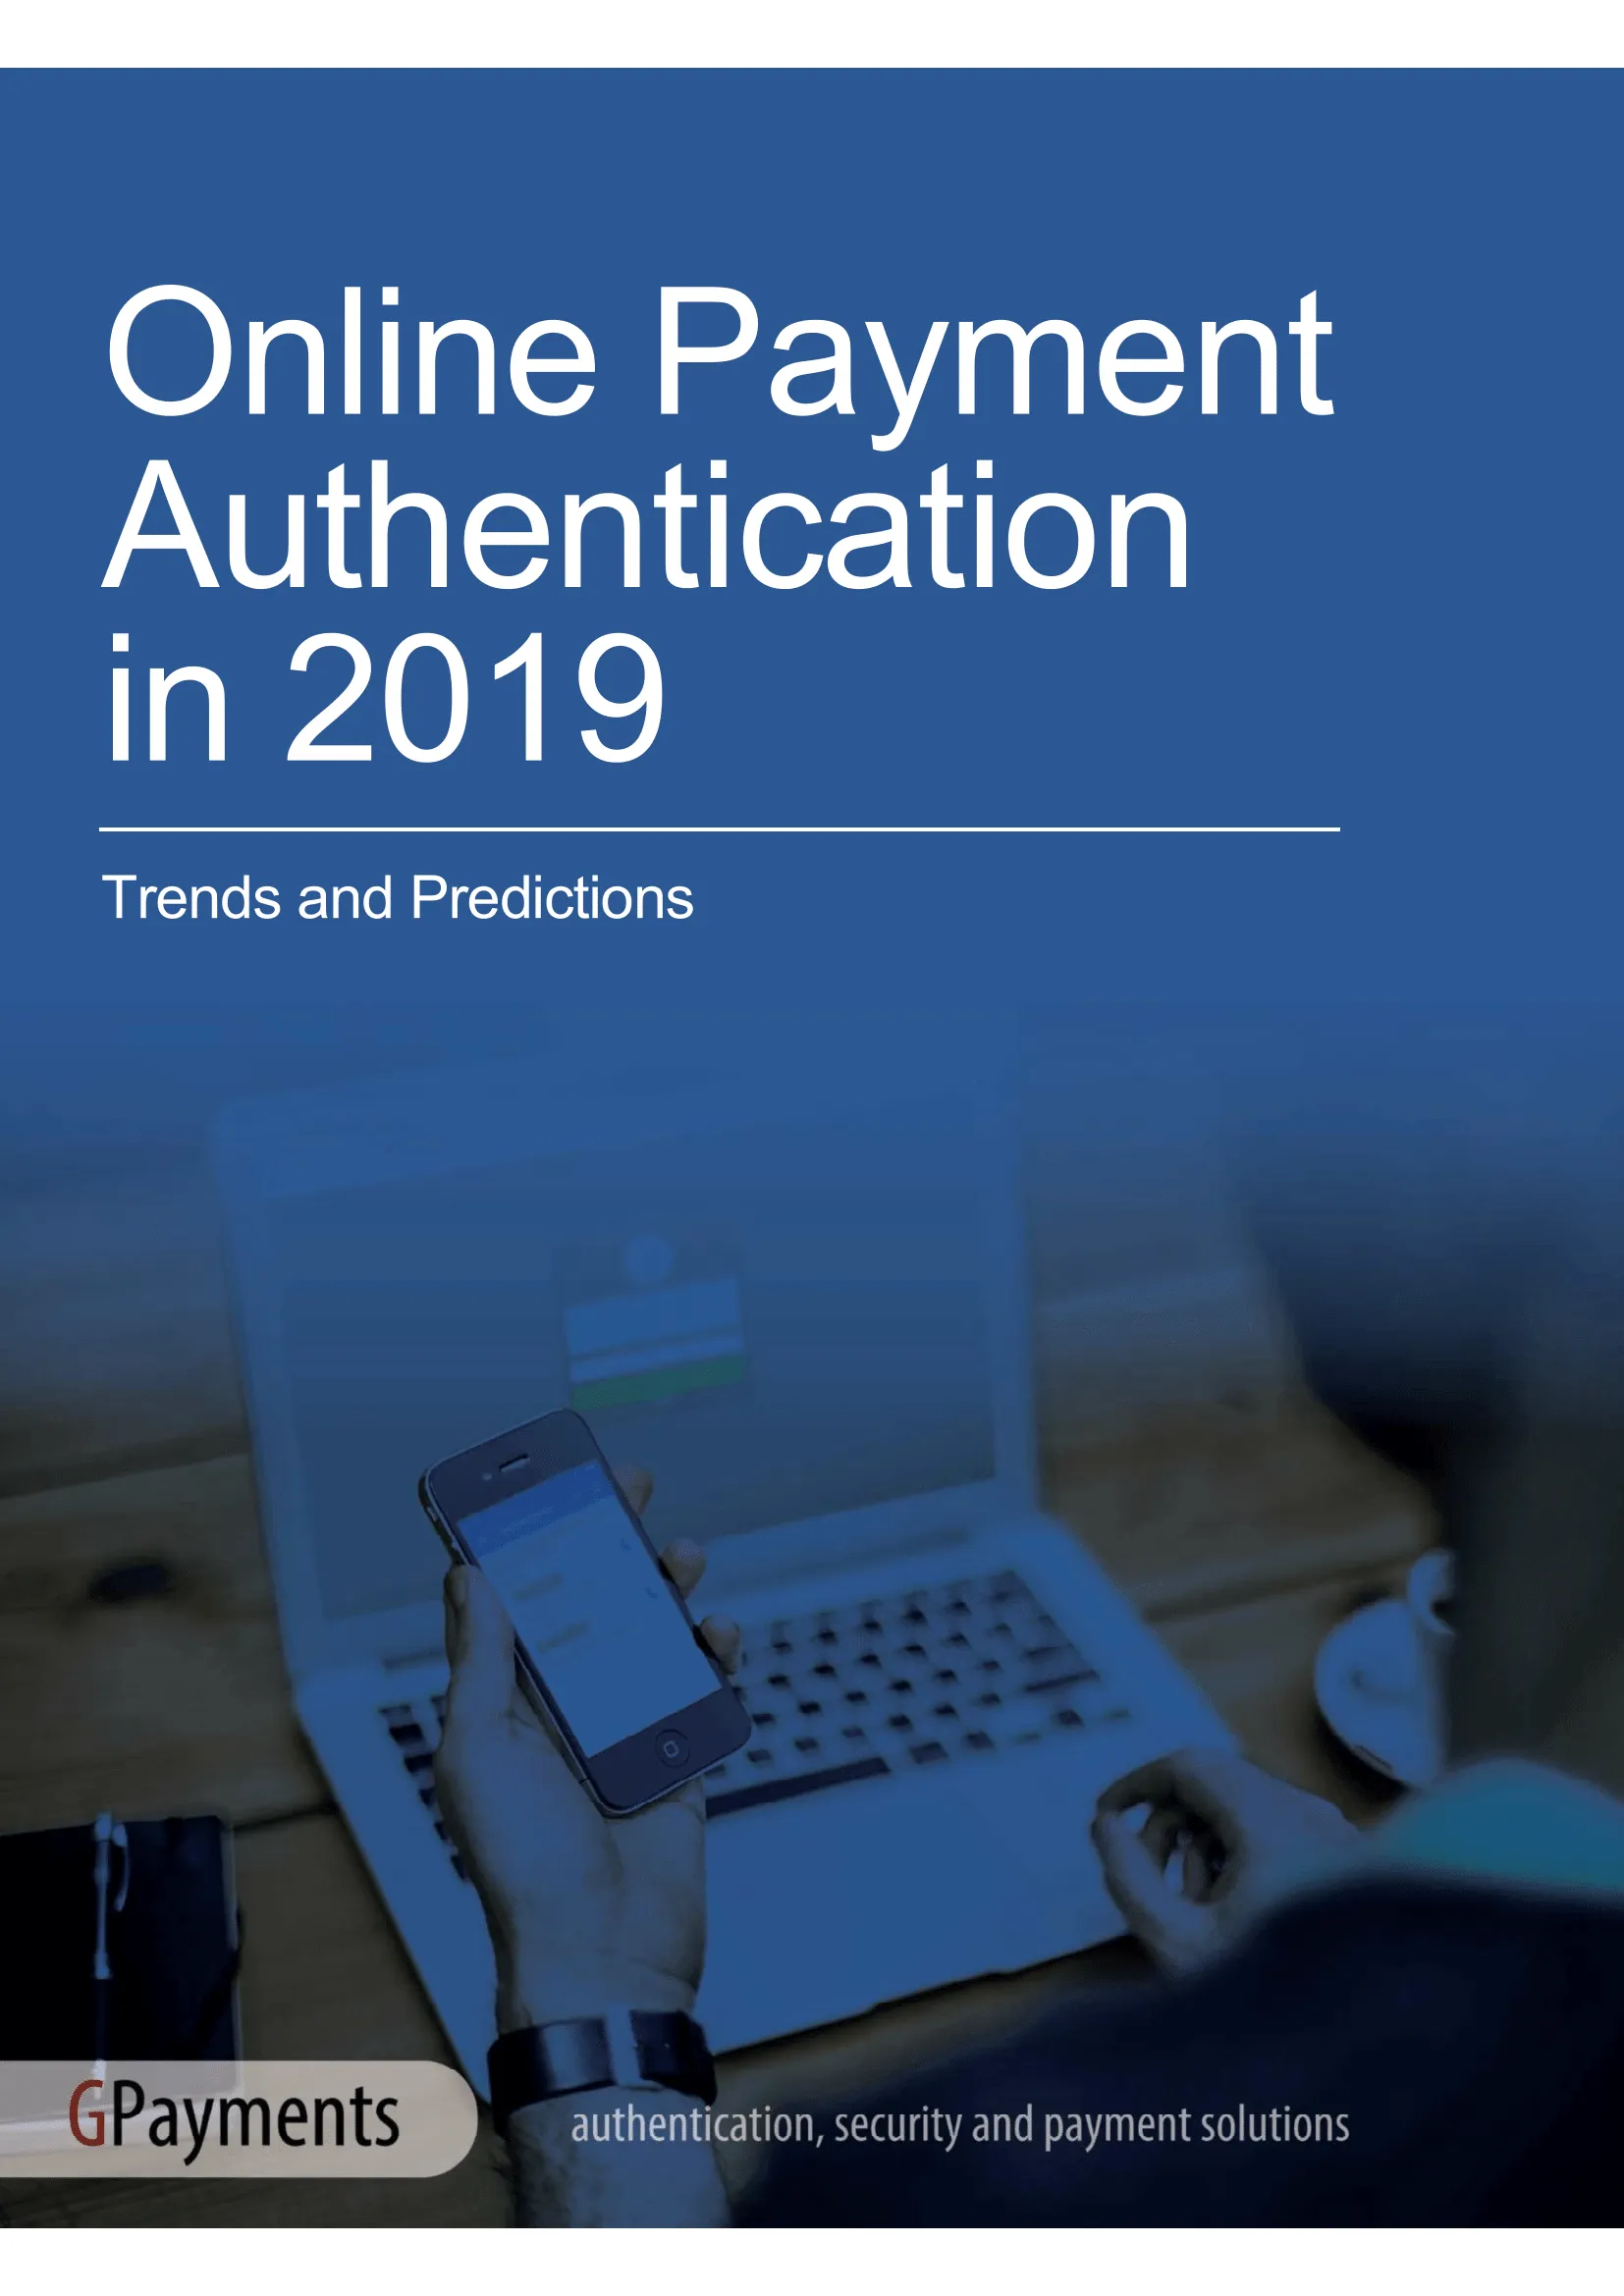 Online payment authentication in 2019 cover